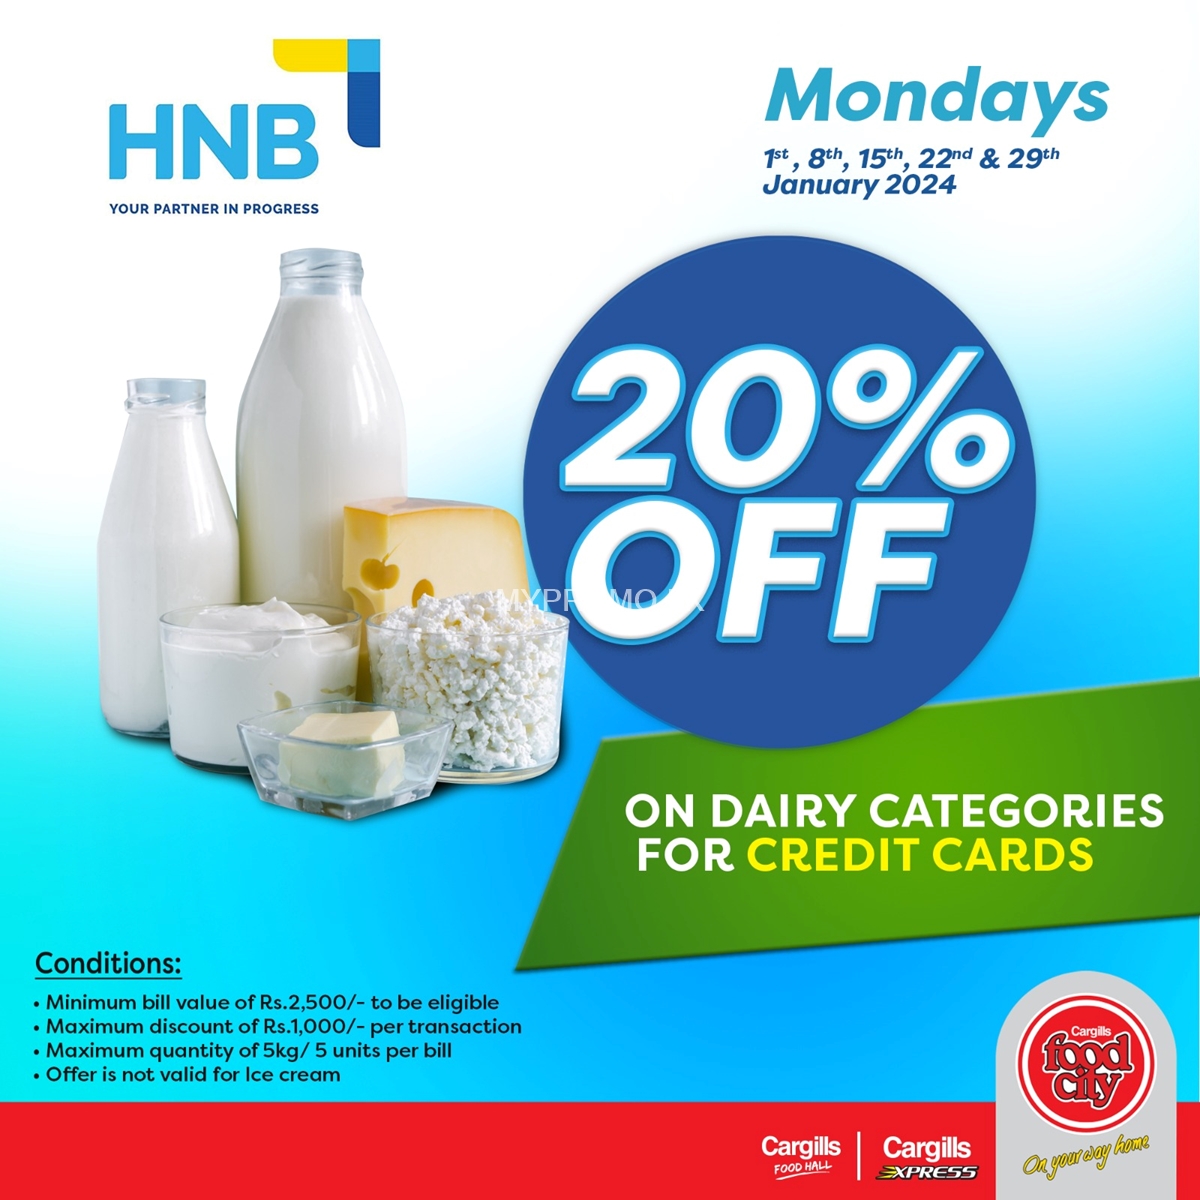 Get 20% off on dairy categories for credit cards from HNB at Cargills Food City